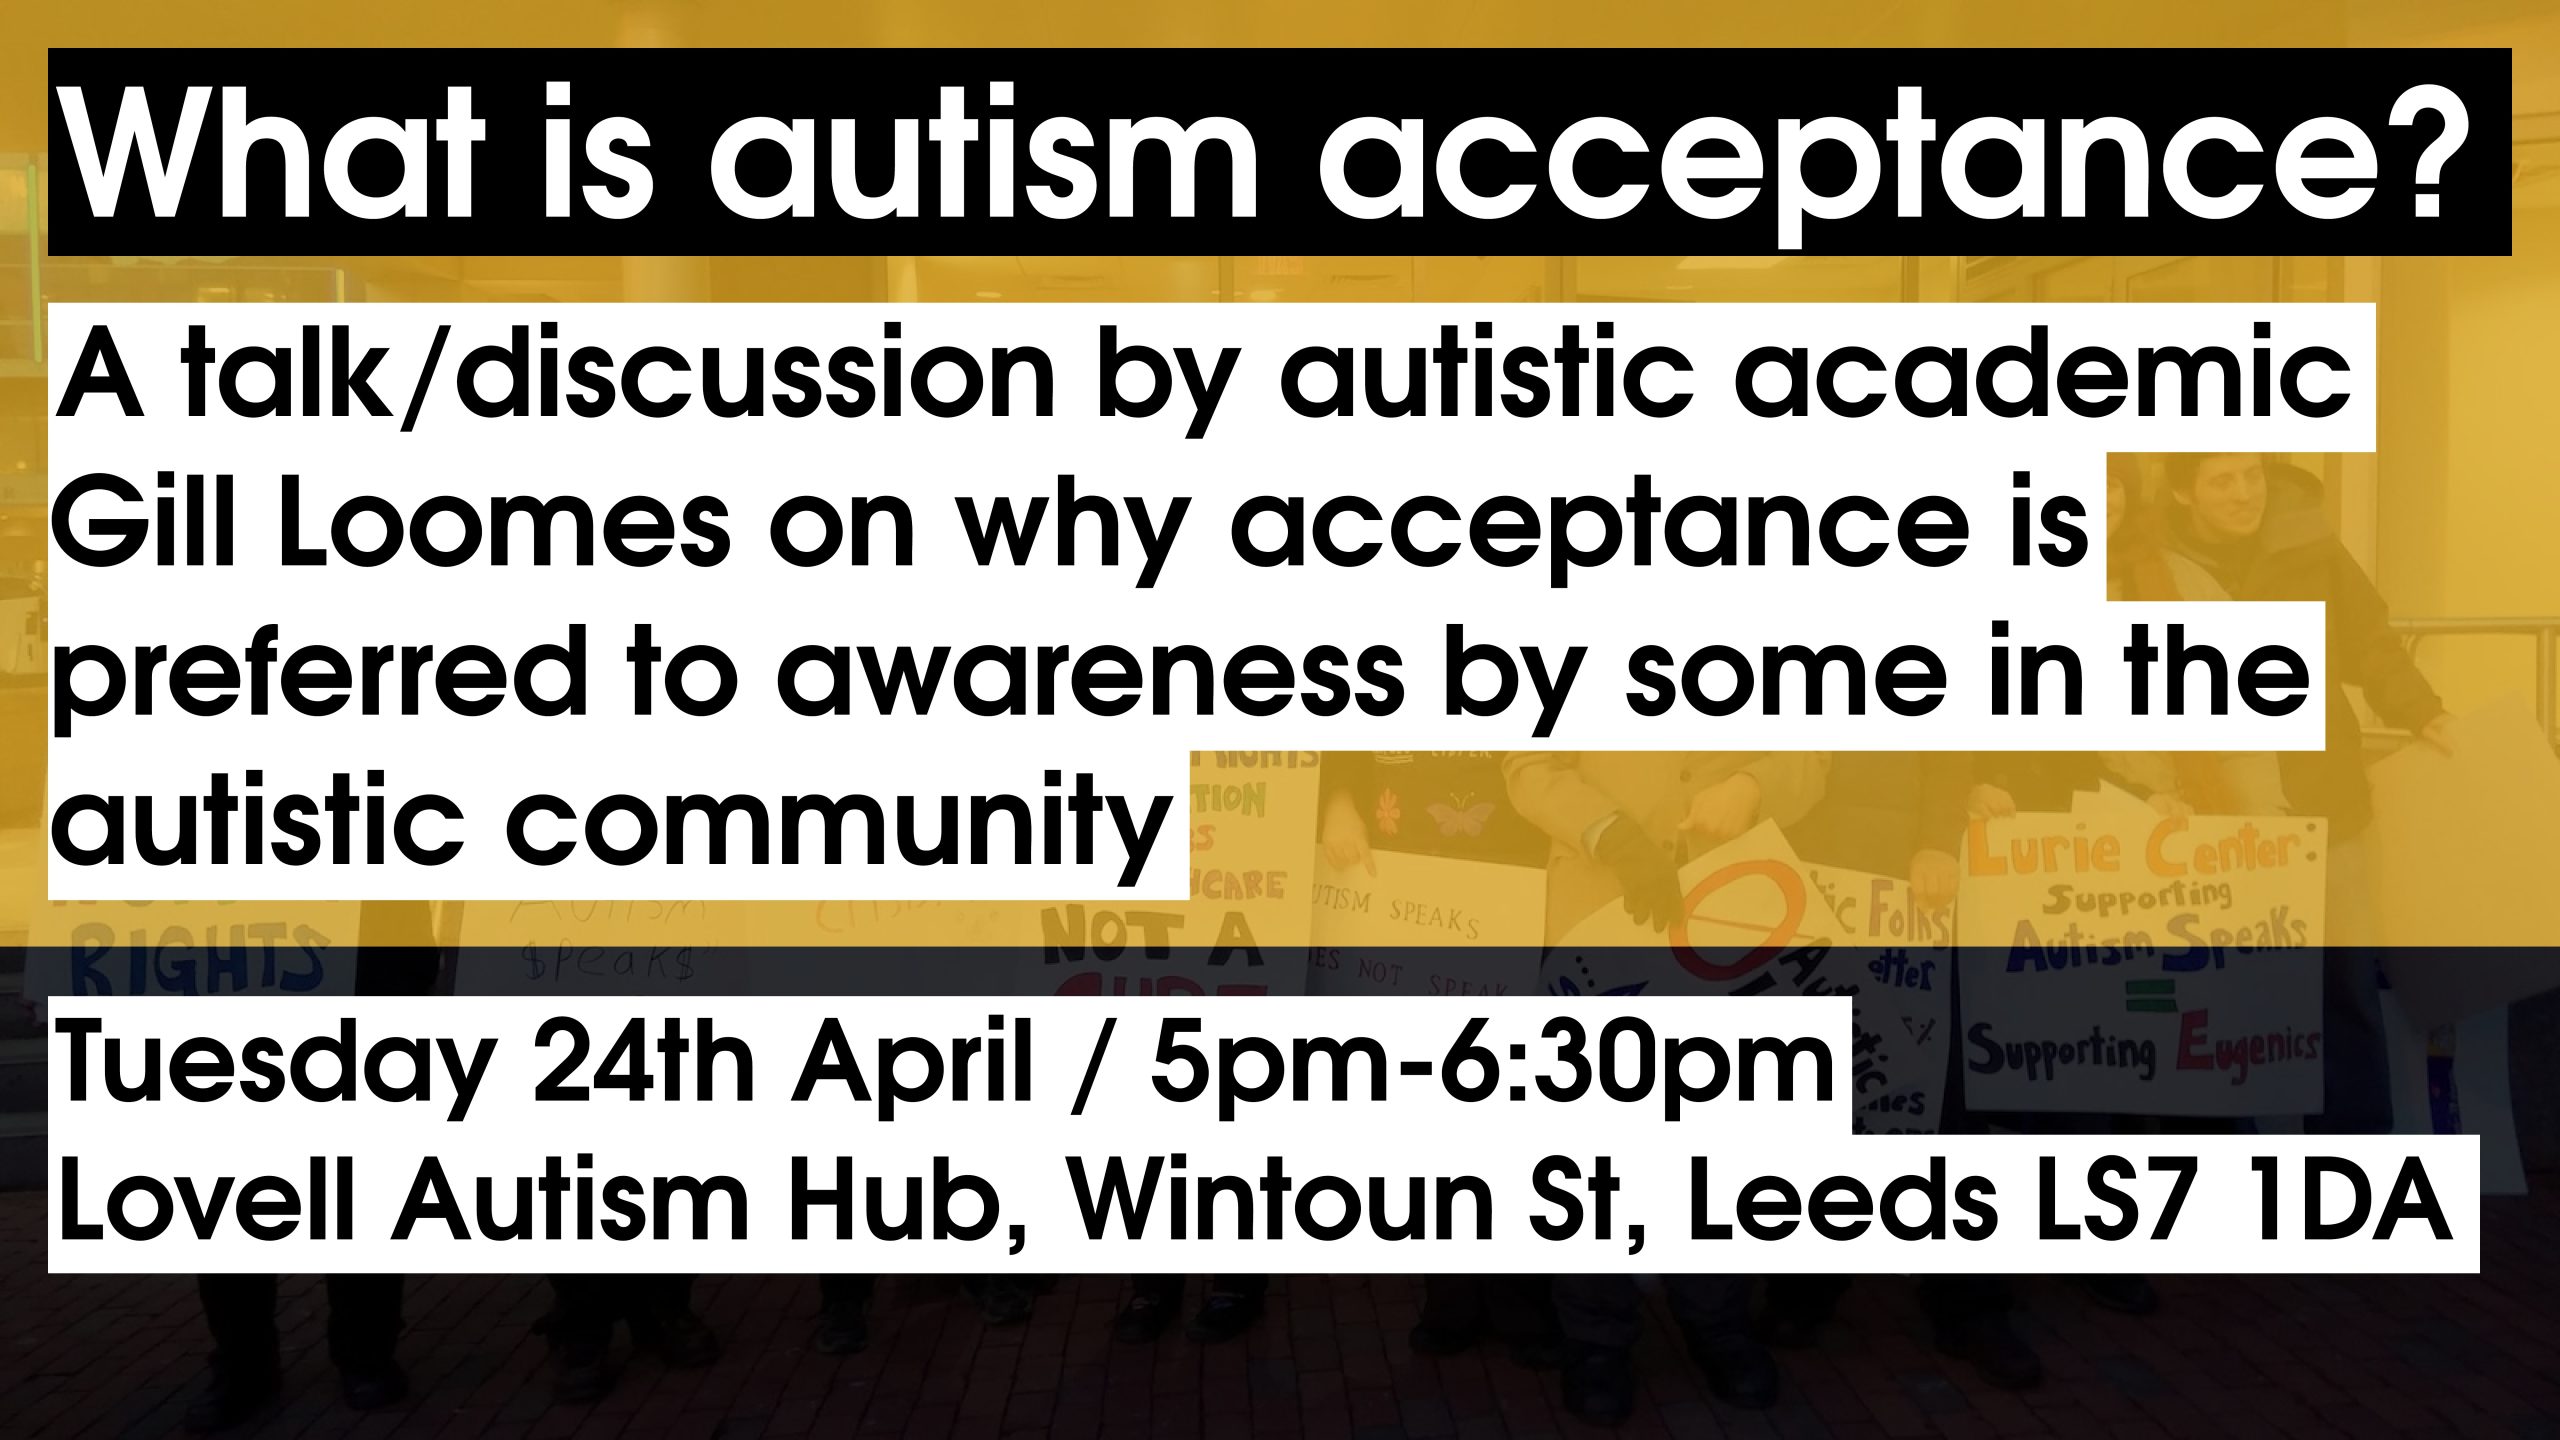 What is autism acceptance? - Intro slide